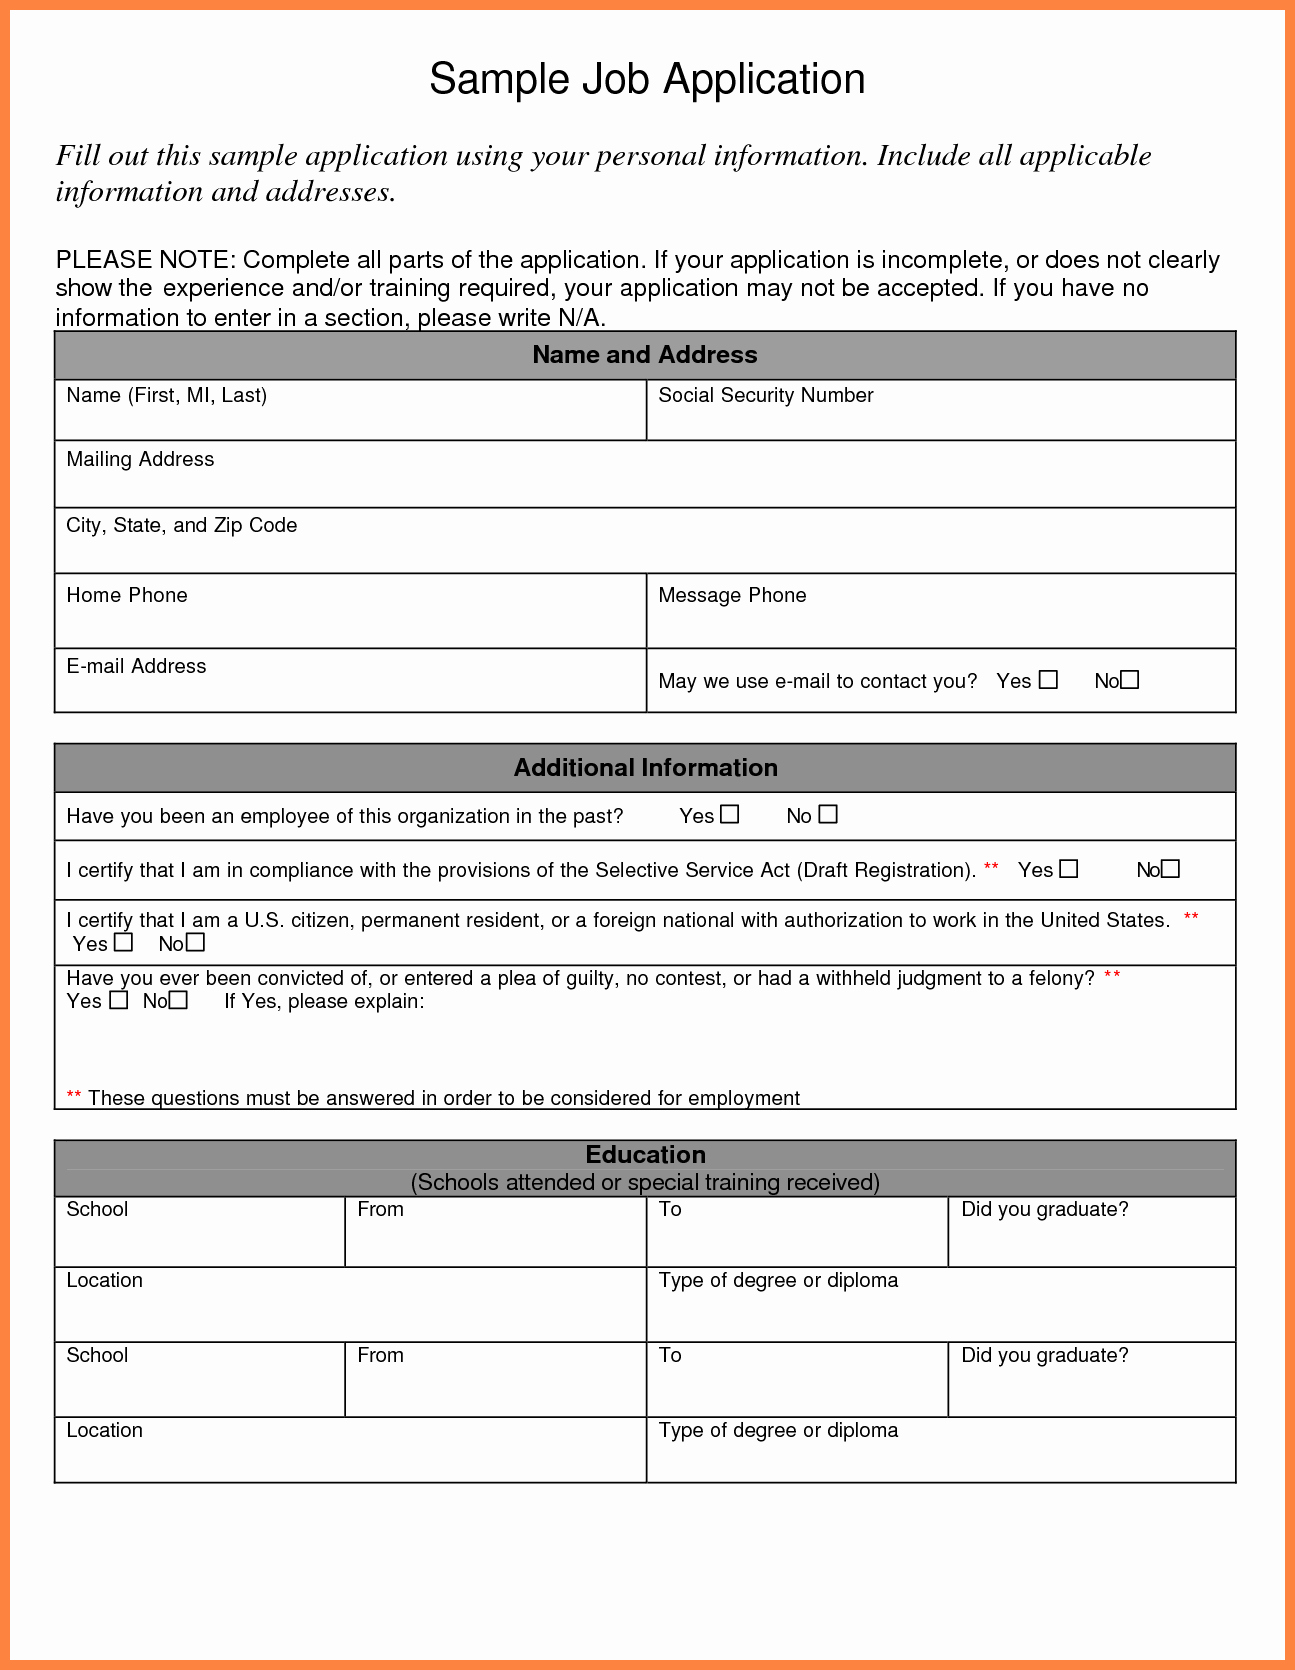 Sample Job Application form Awesome 8 Sample Employment Application